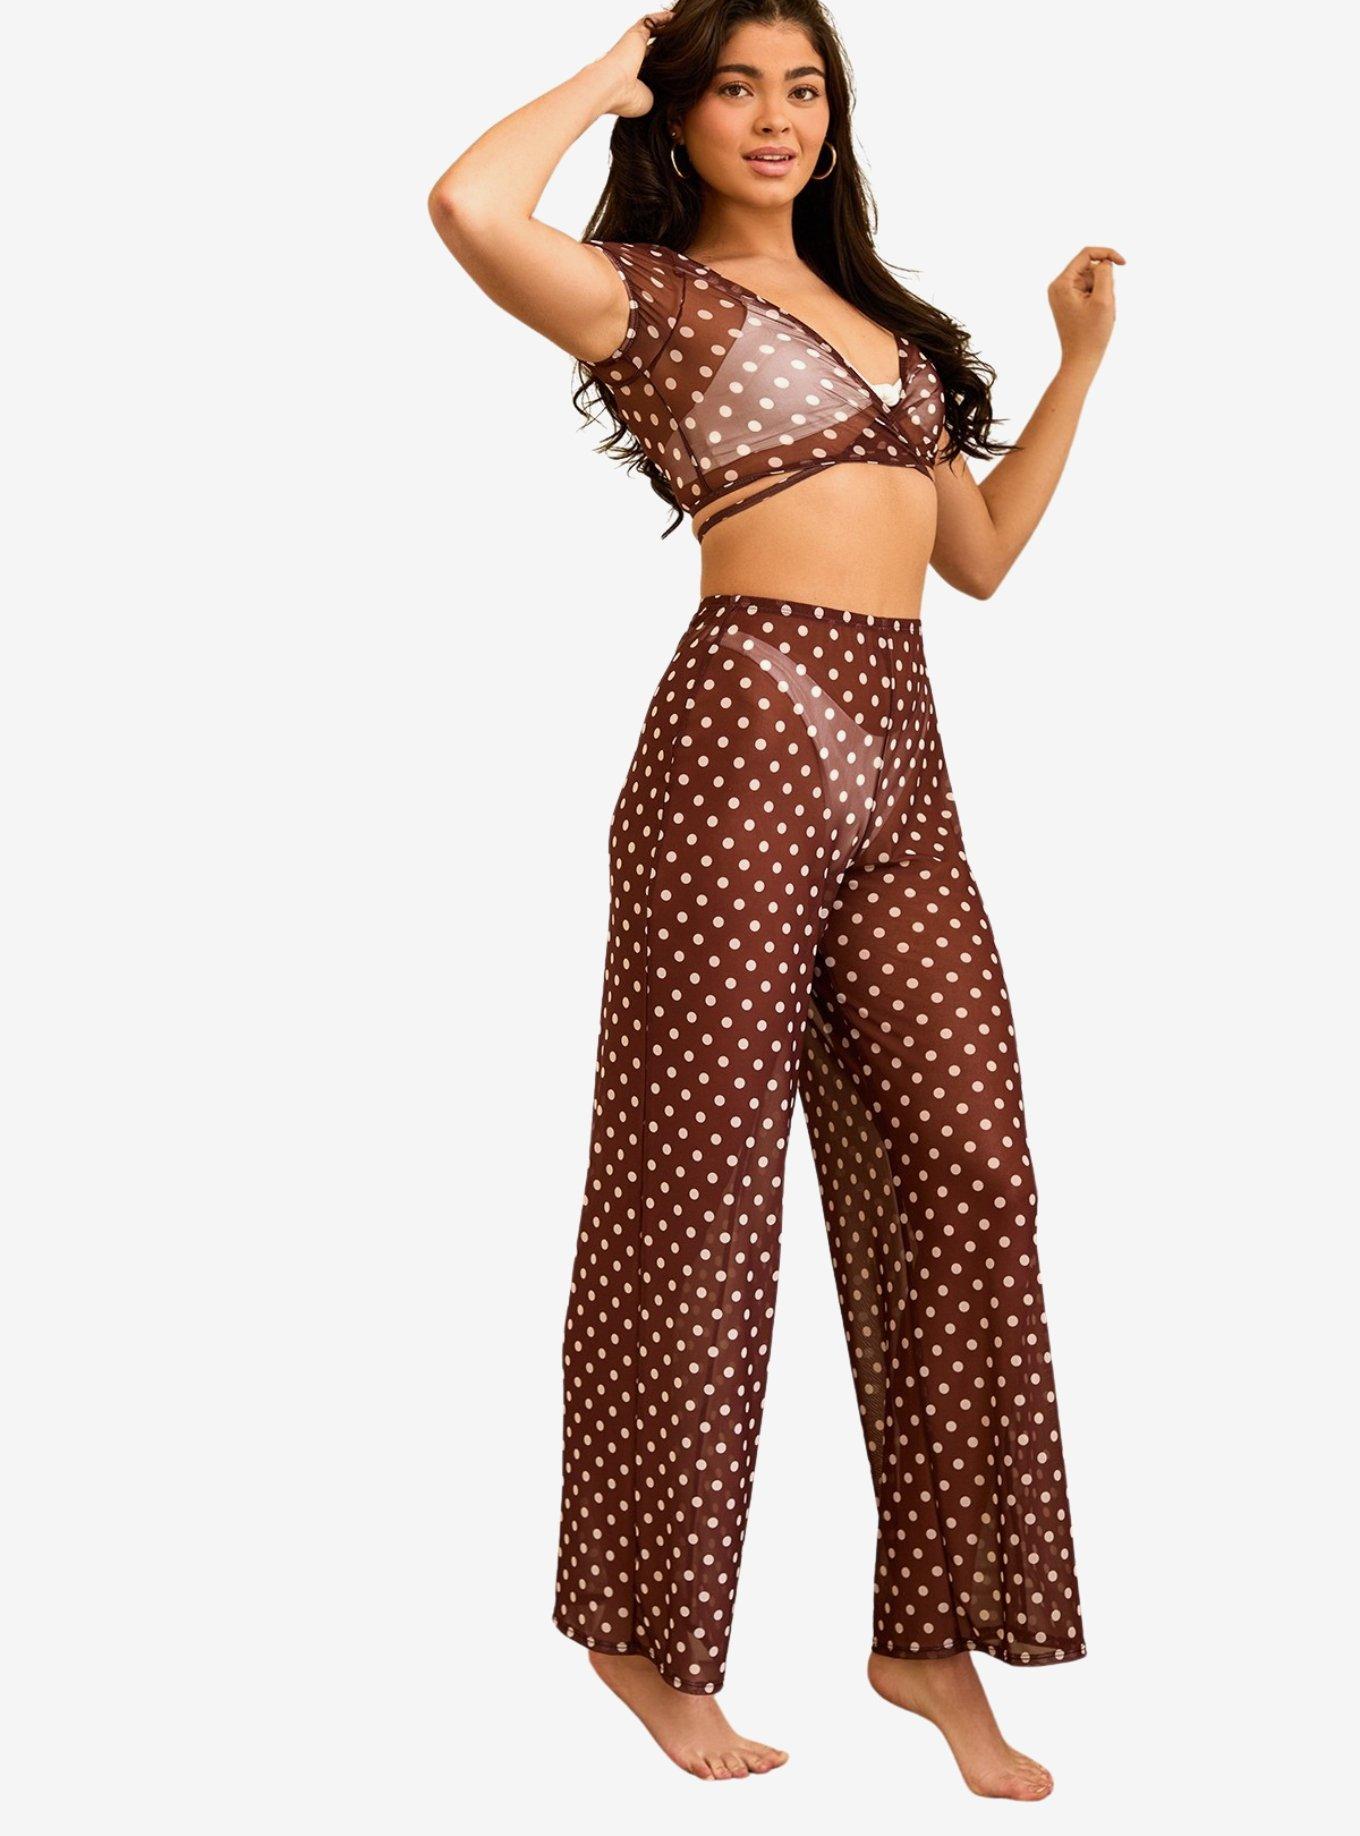 Dippin' Daisy's Cher Swim Cover-Up Top Dotted Brown, BROWN, alternate